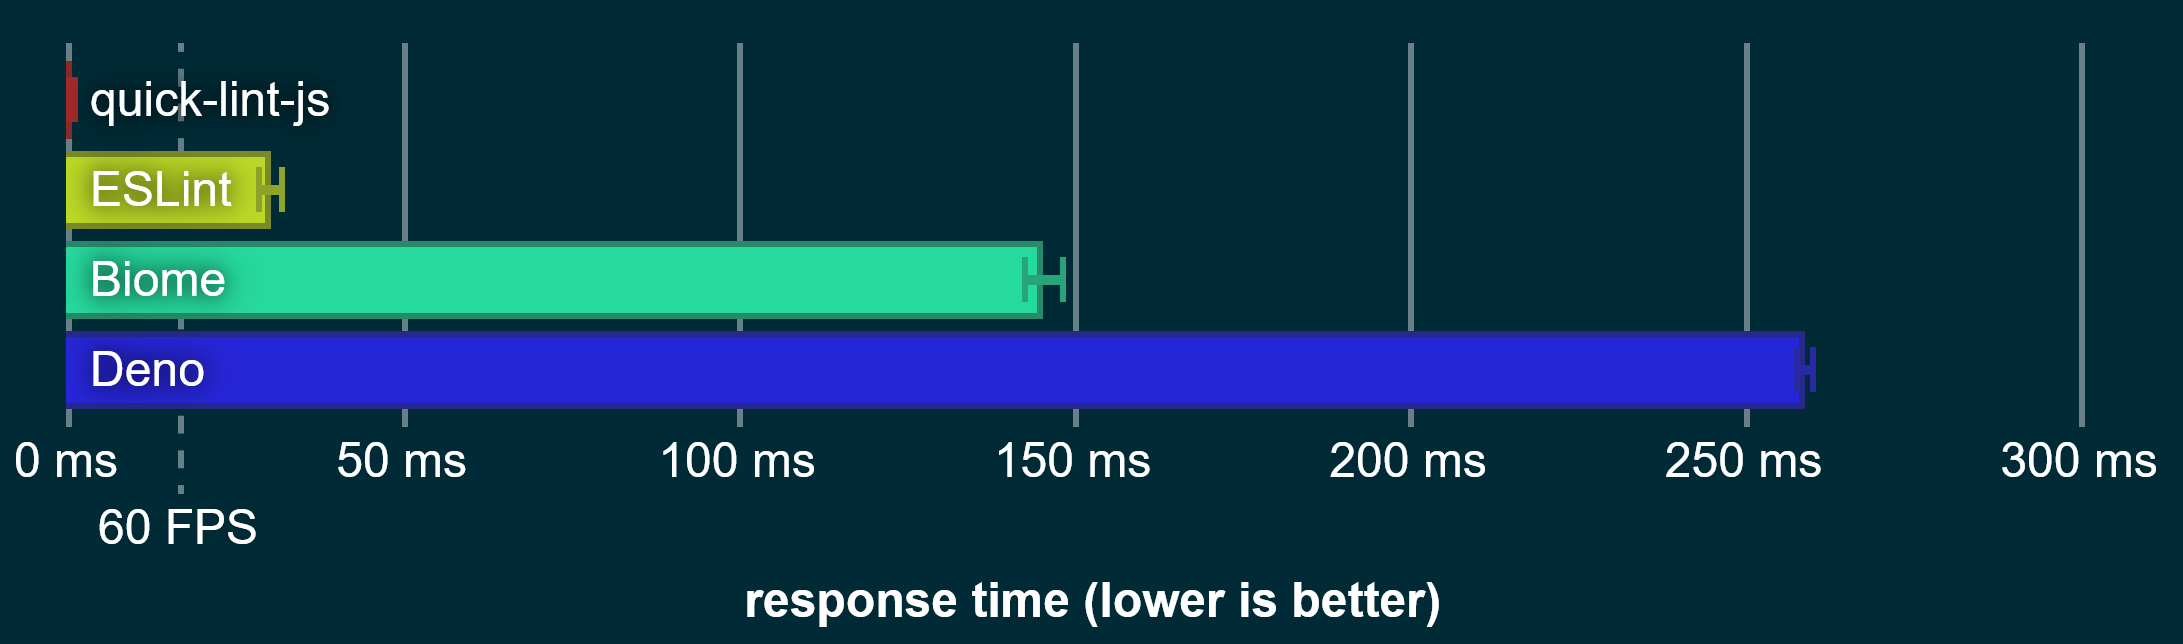 LSP server benchmark comparing quick-lint-js, ESLint, Biome, and Deno. quick-lint-js is sub-millisecond; other linters are slower than 60 FPS.